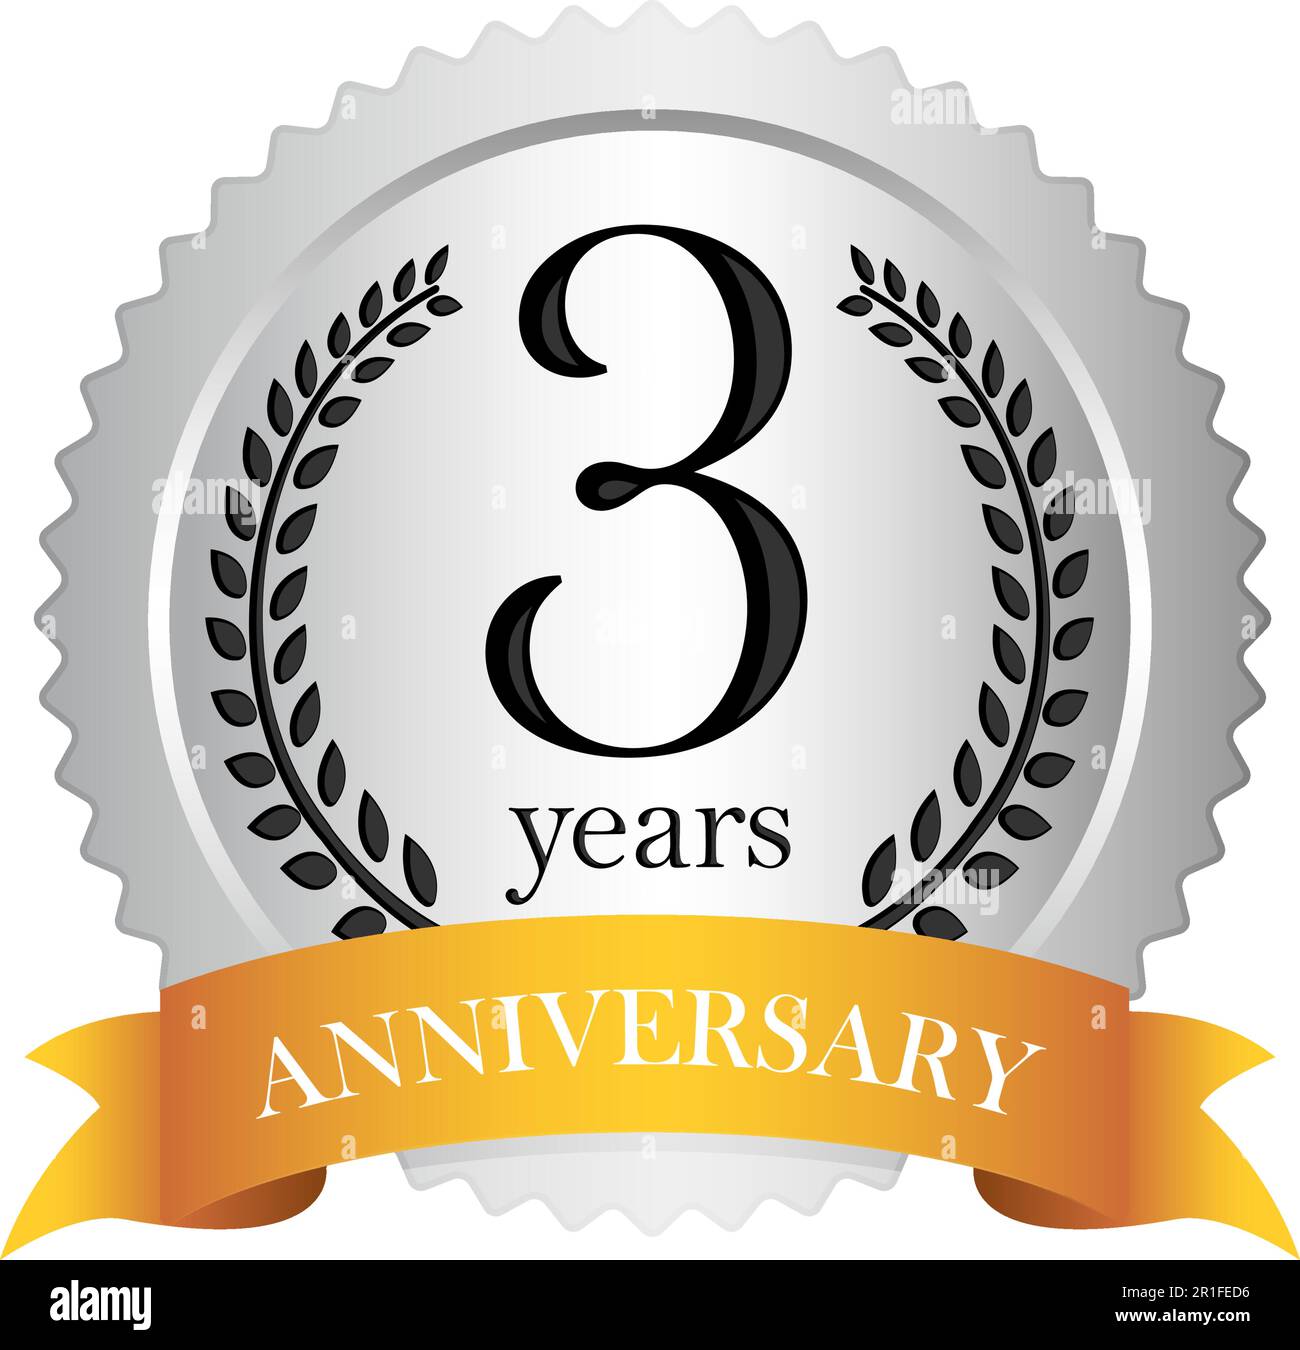 Silver anniversary medal icon | 3rd anniversary Stock Vector